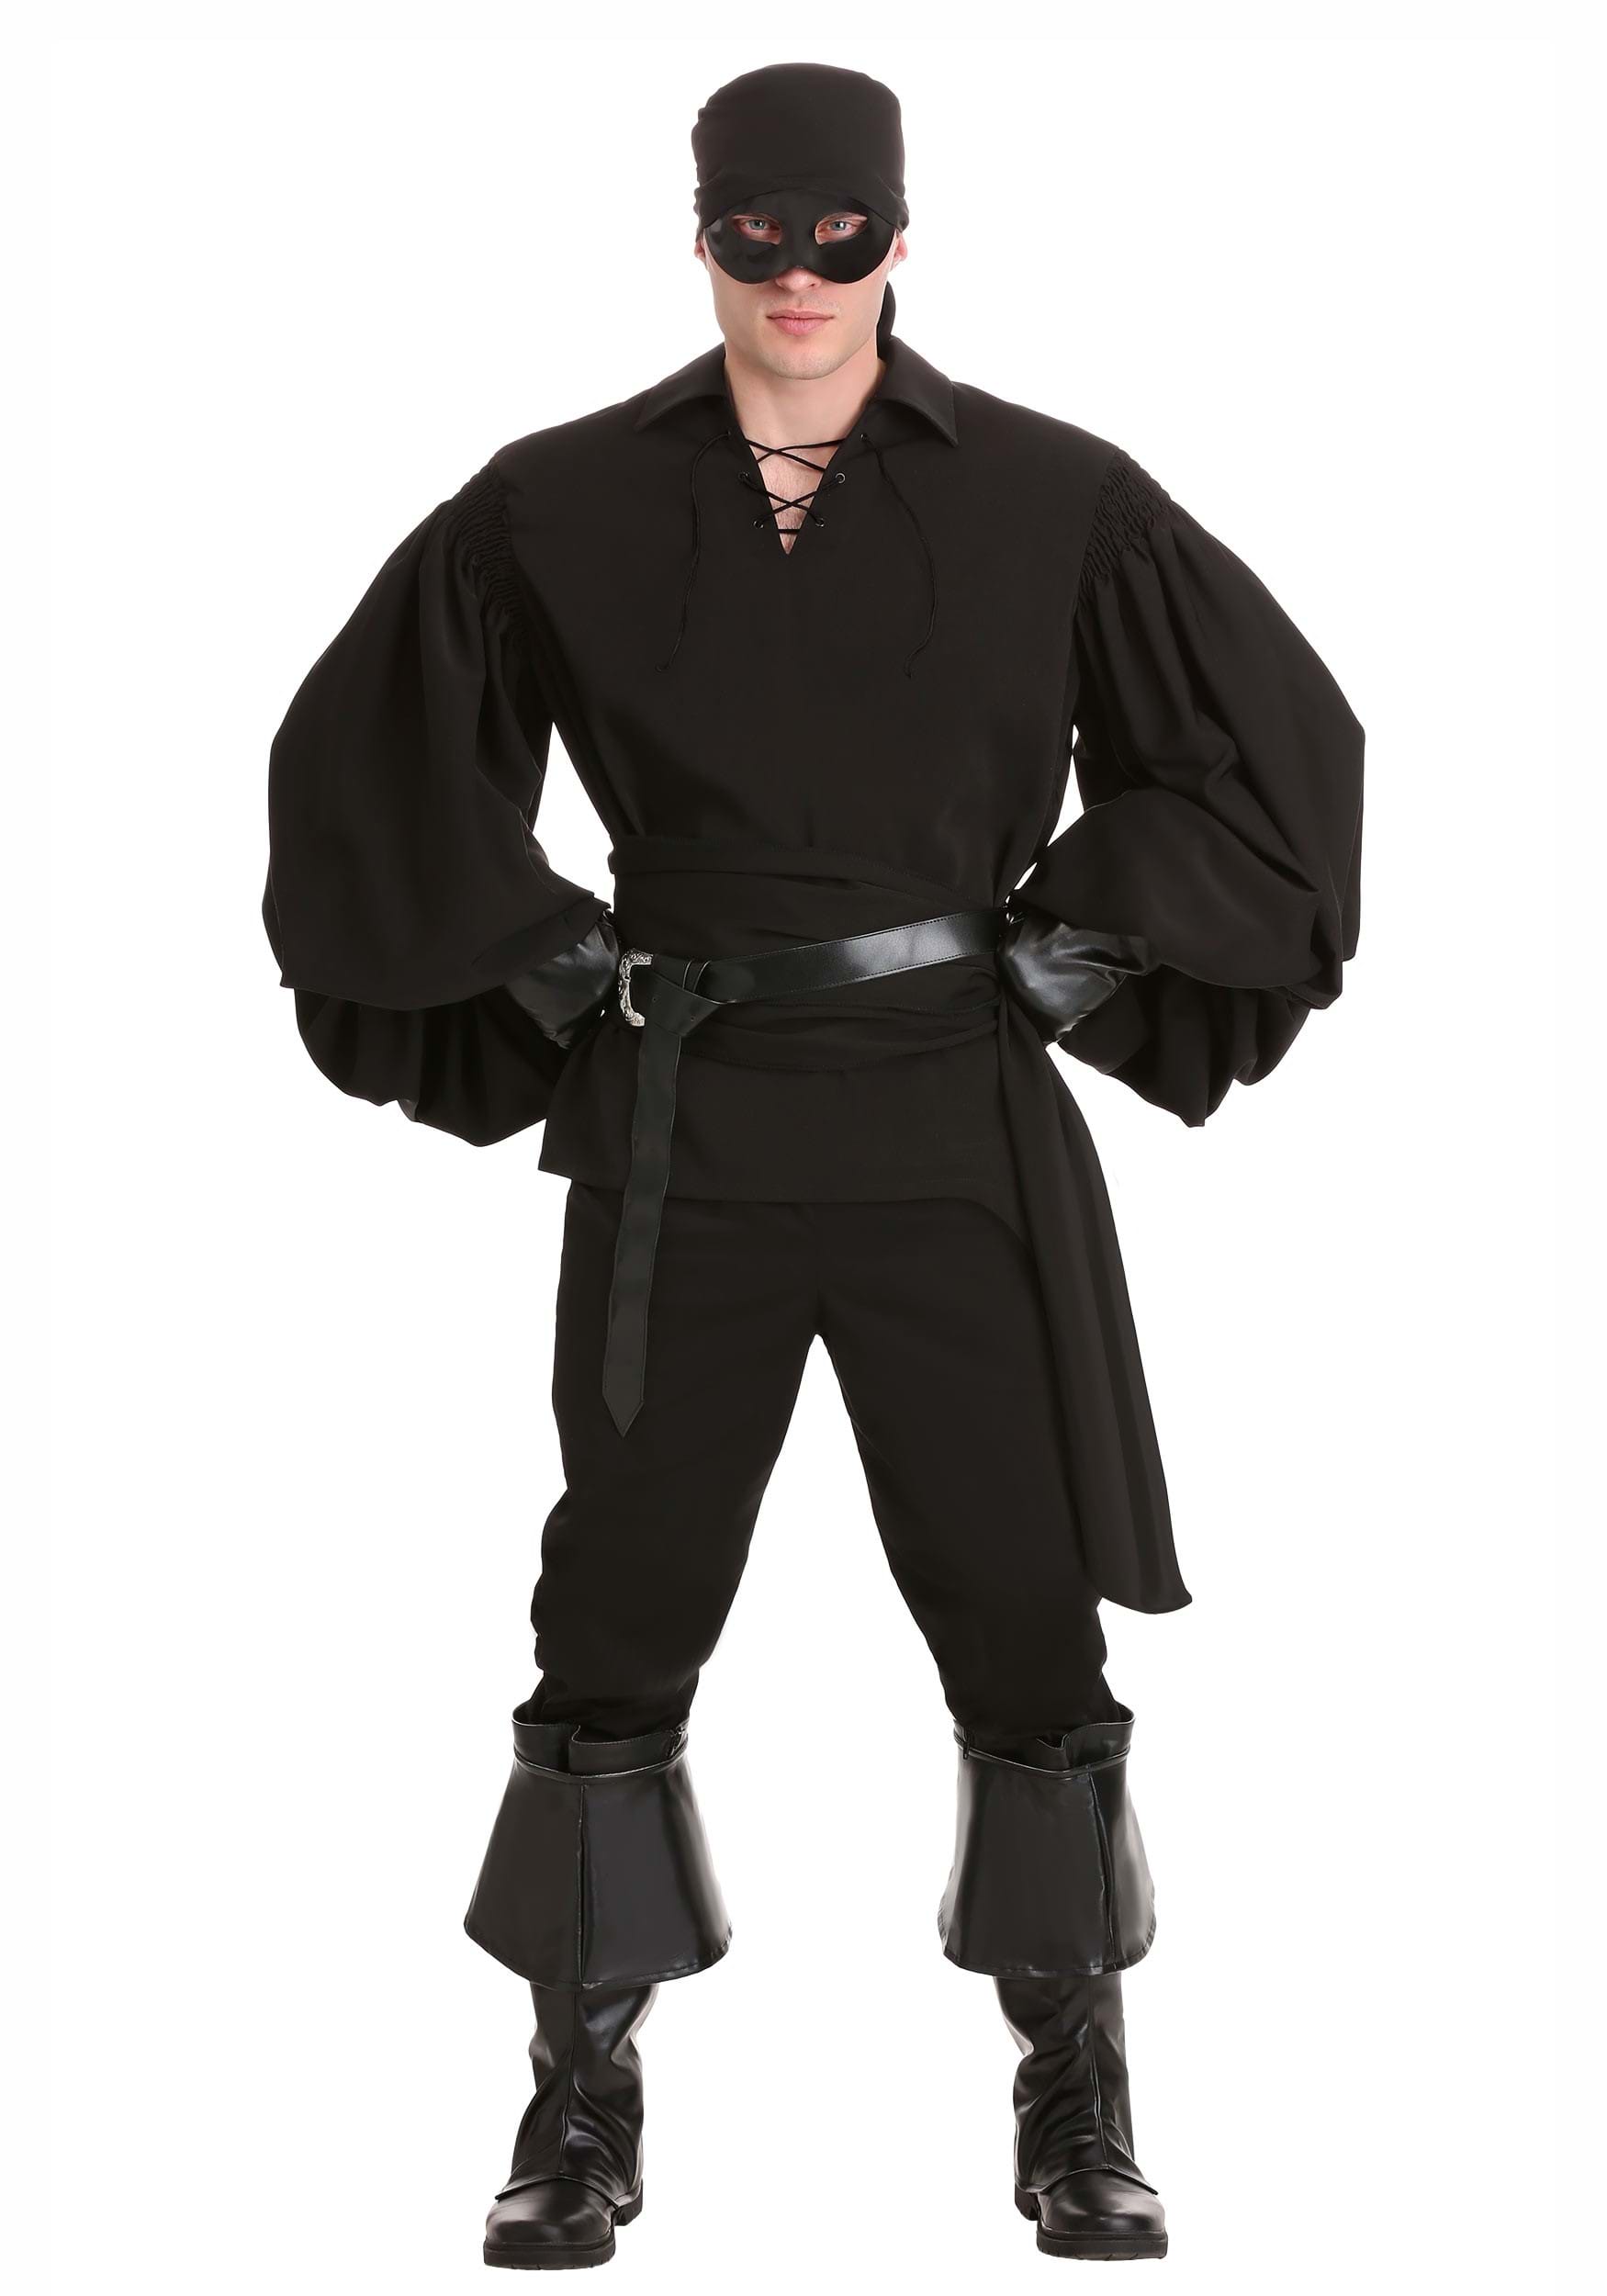 Image of Authentic Westley The Princess Bride Adult Halloween Costume ID FUN7413AD-S